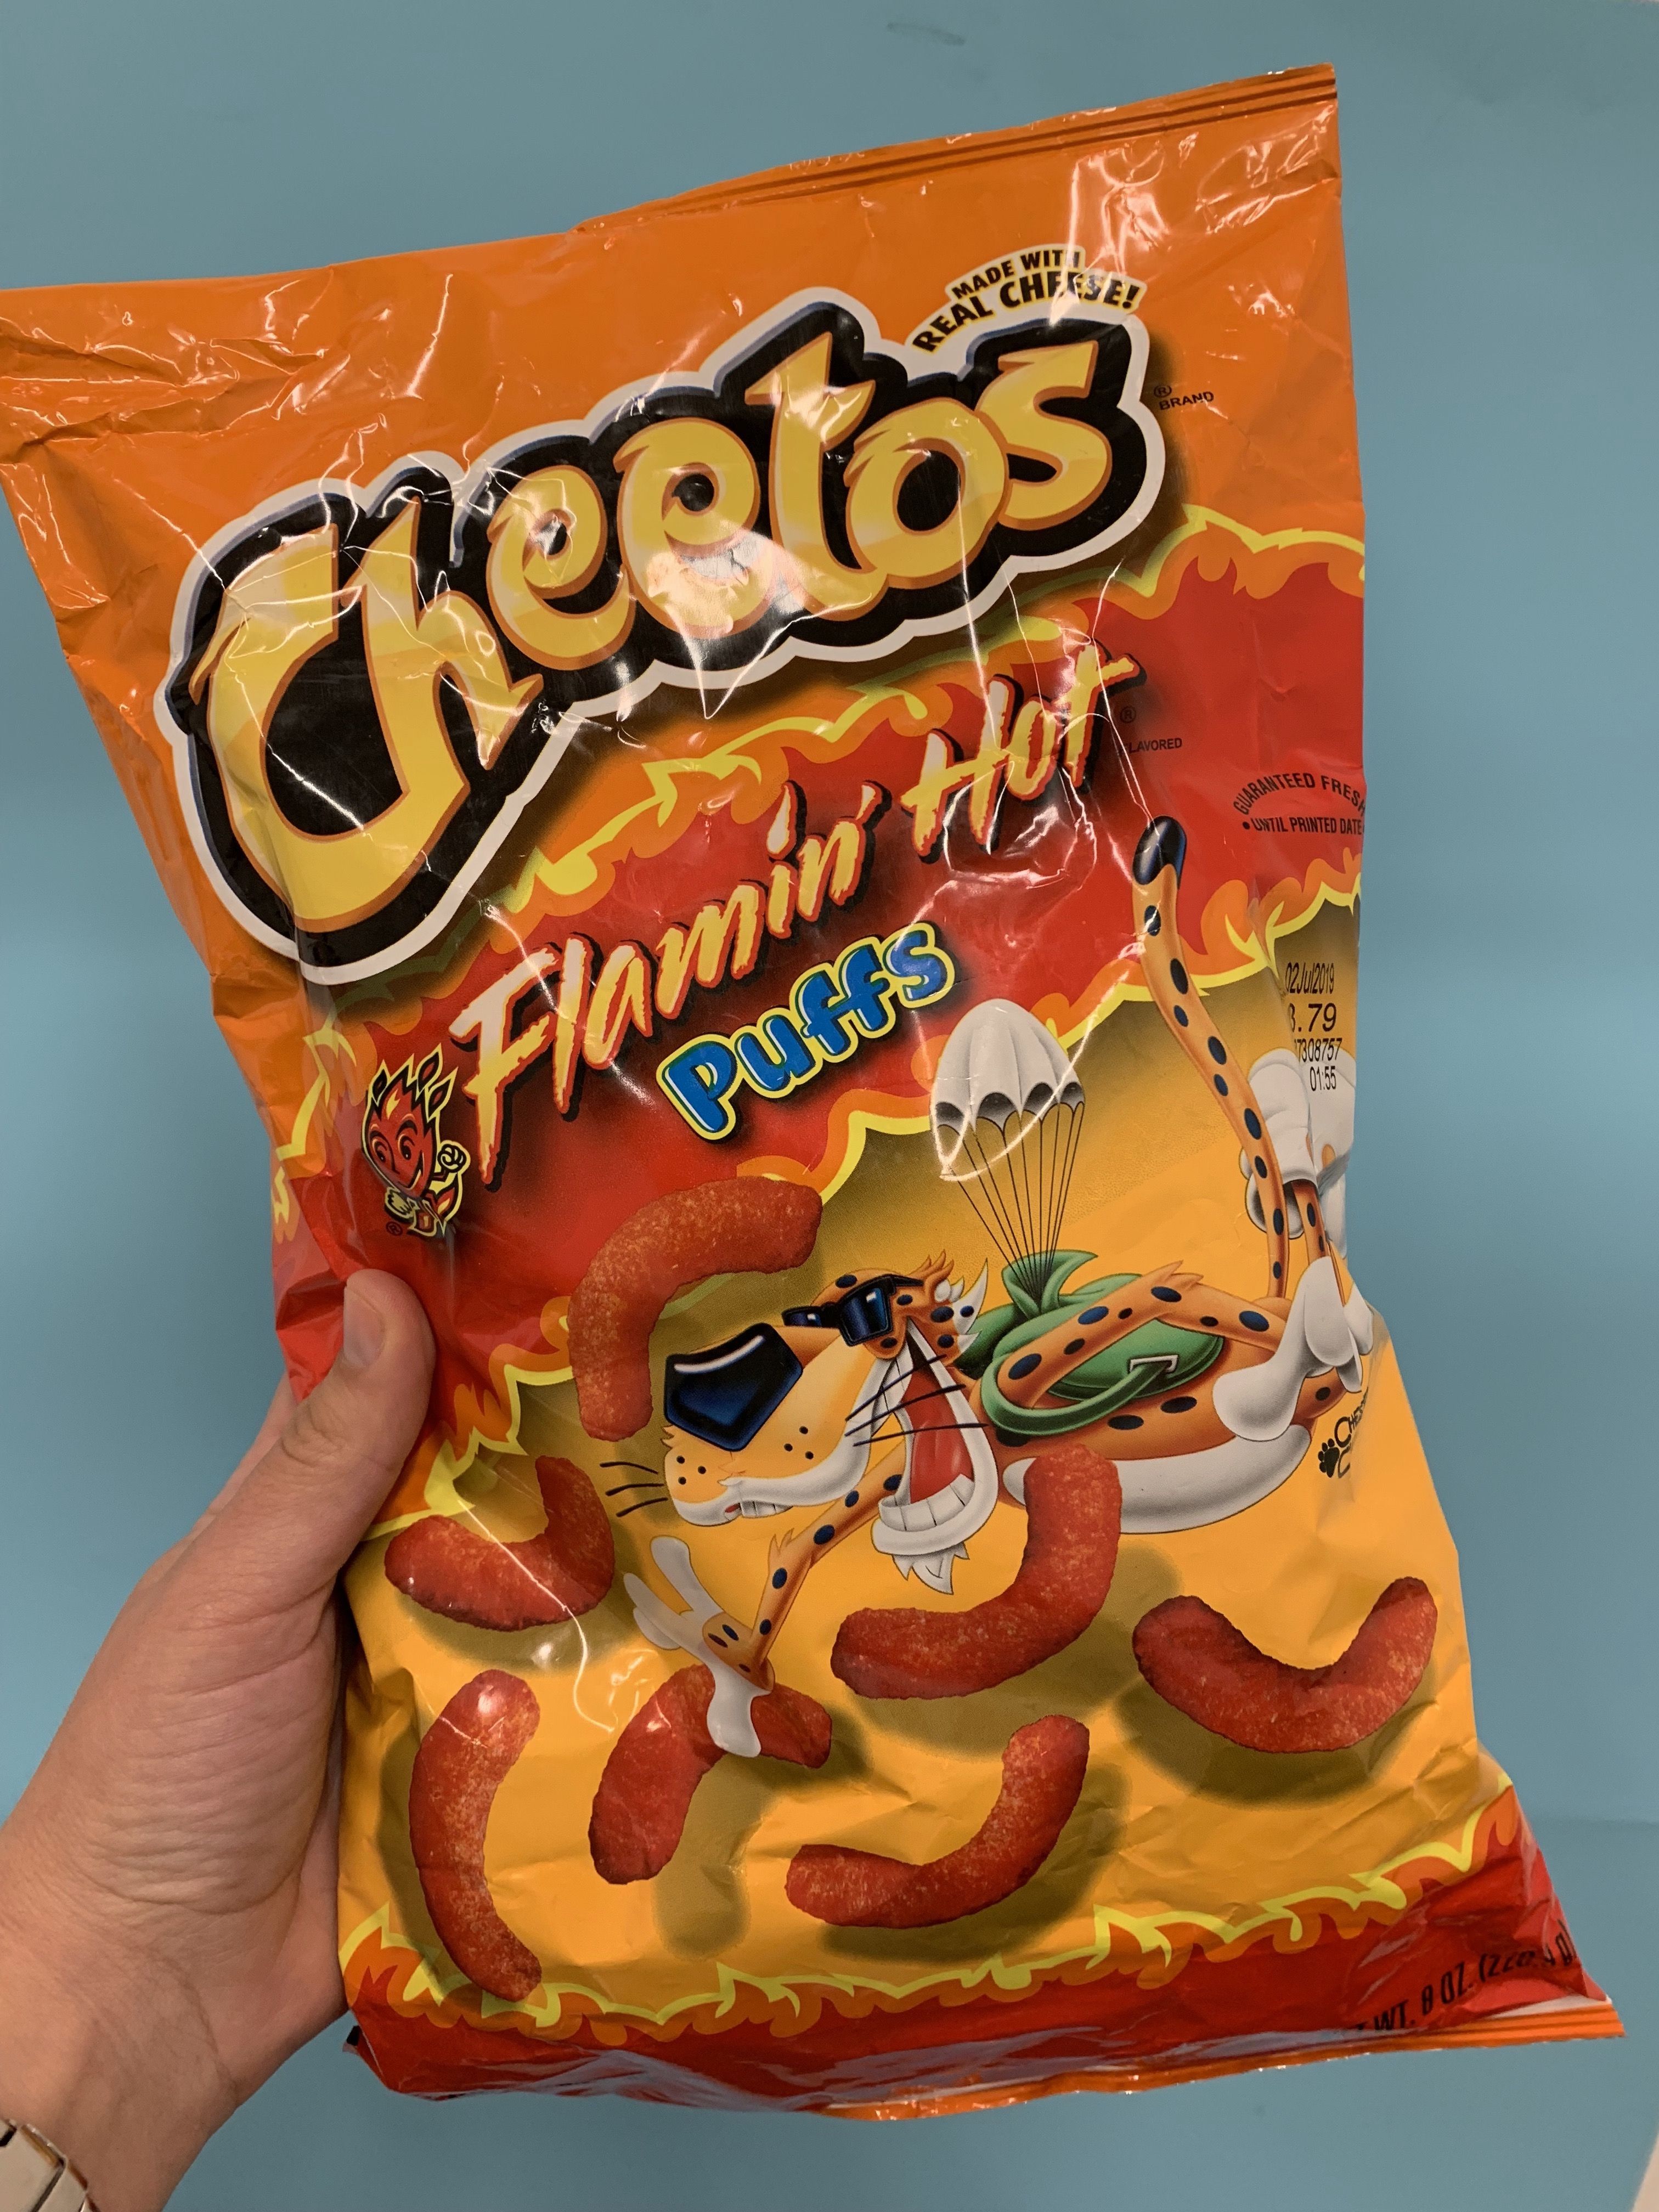 Flamin' Hot Cheetos Puffs Exist And Here's Where To Find Them